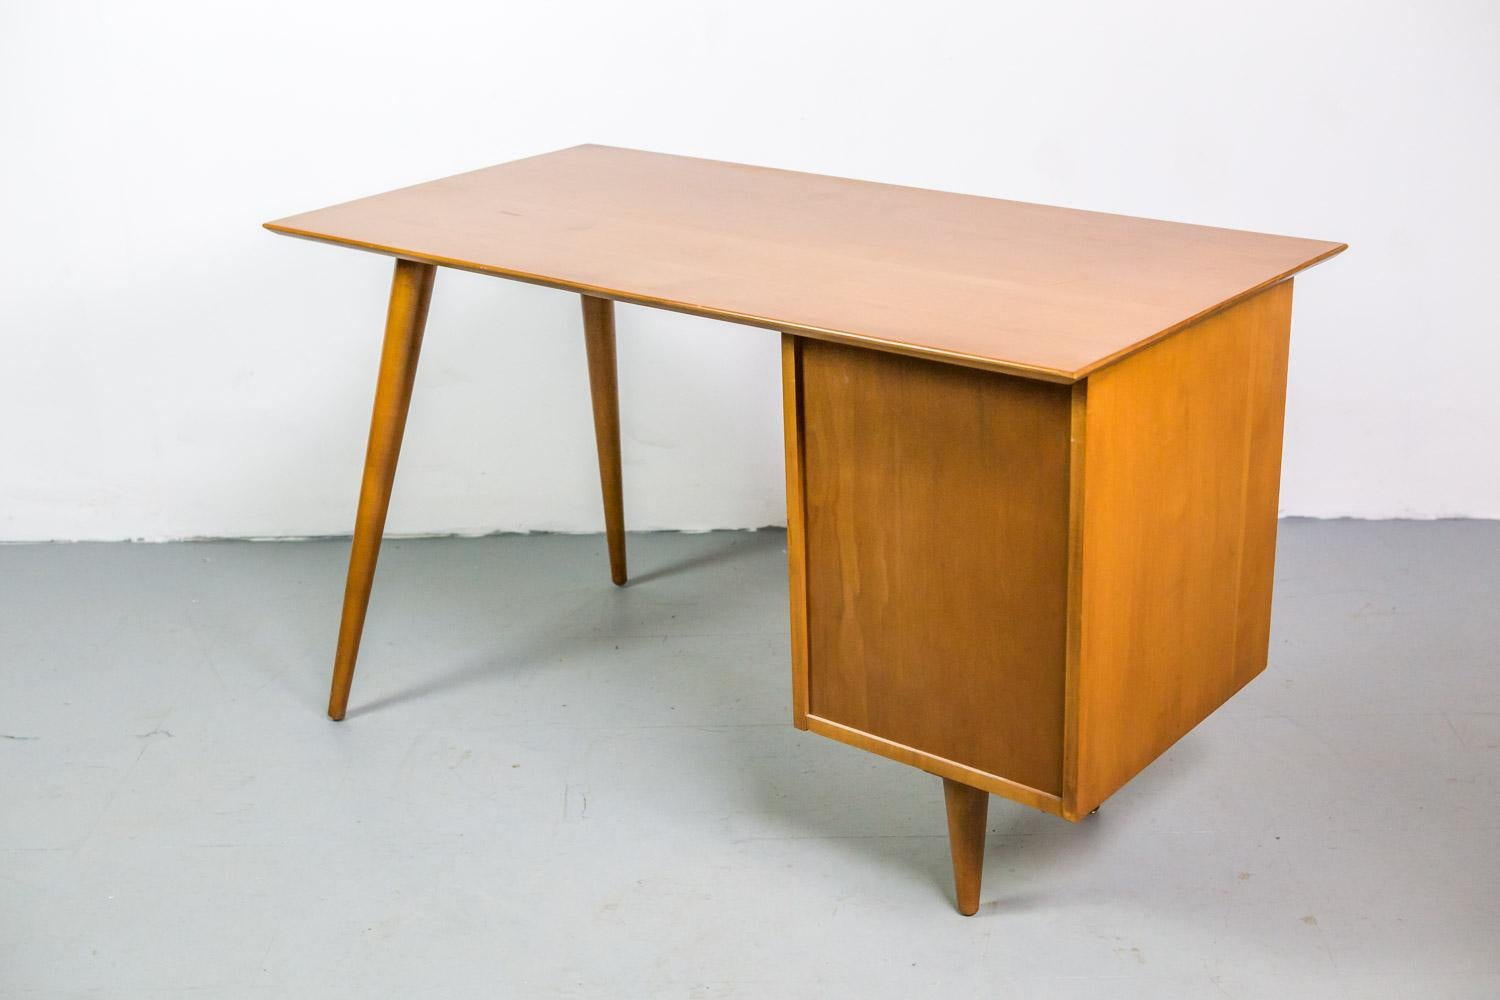 Mid-20th Century Paul McCobb Desk for Planner Group in Solid Maple, 1950s